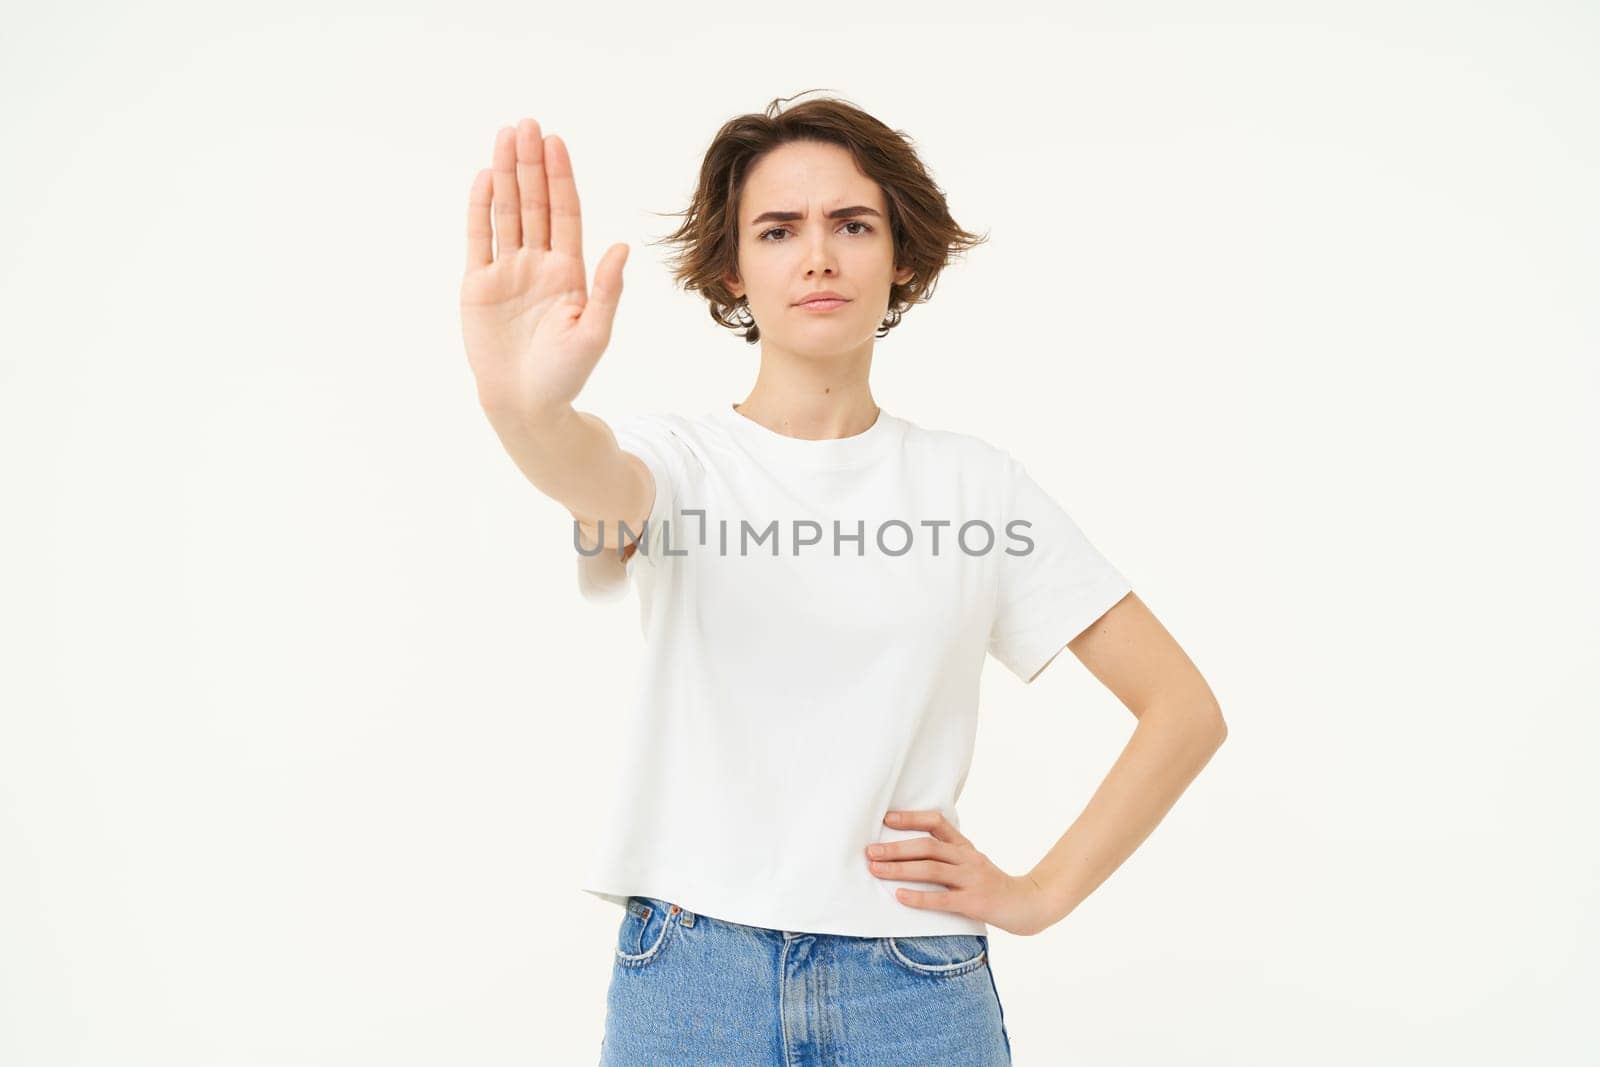 Portrait of serious, confident young woman extends one hand, shows stop, disapproval gesture, looking determined to block way, isolated over white background.